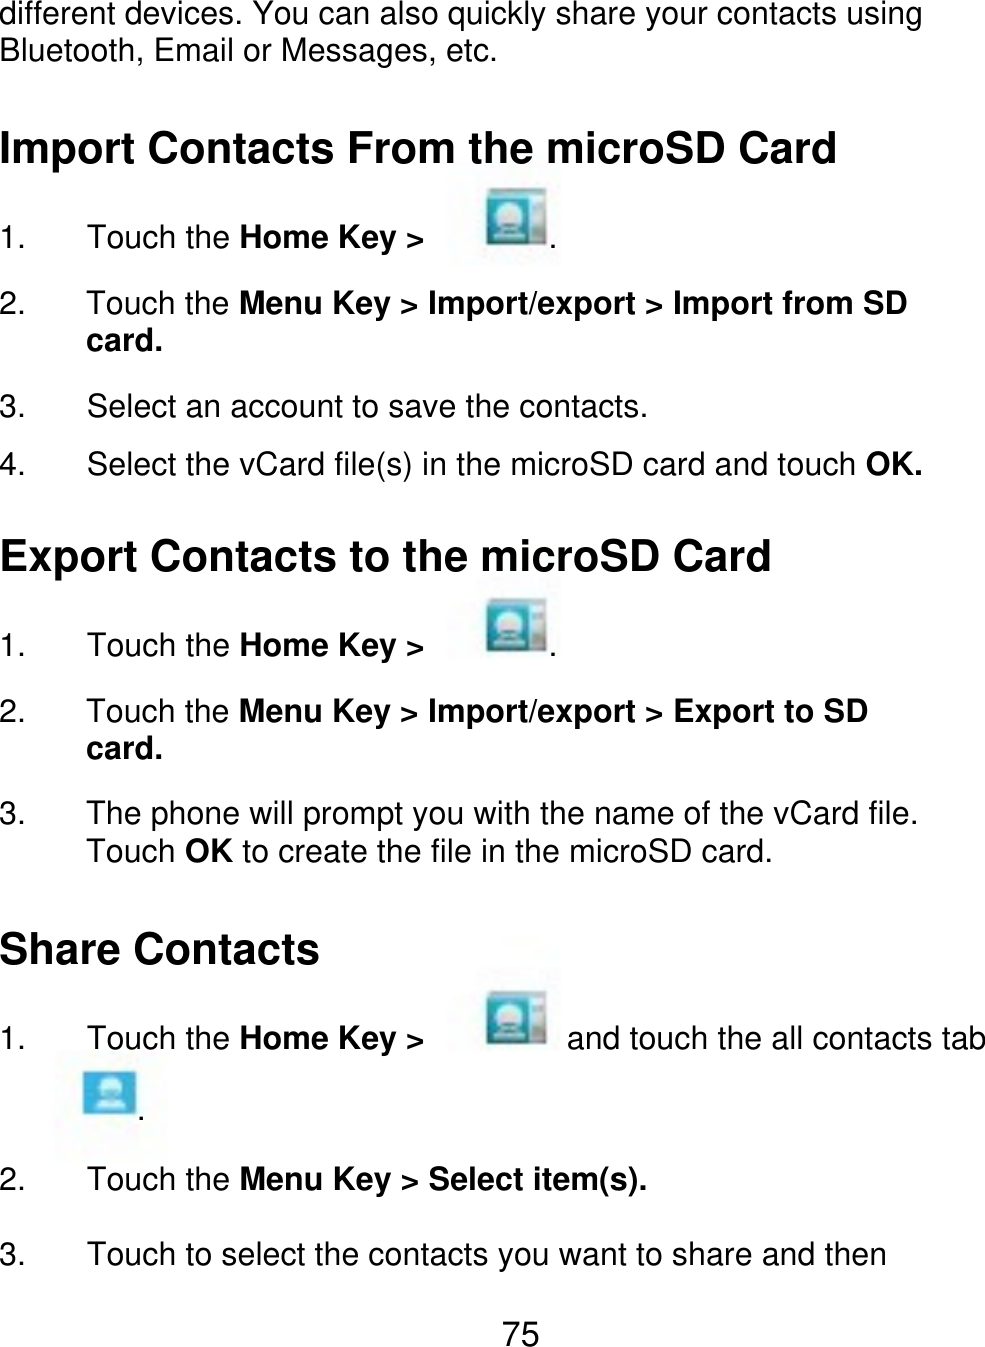 different devices. You can also quickly share your contacts using Bluetooth, Email or Messages, etc. Import Contacts From the microSD Card 1. 2. 3. 4. Touch the Home Key &gt; . Touch the Menu Key &gt; Import/export &gt; Import from SD card. Select an account to save the contacts. Select the vCard file(s) in the microSD card and touch OK. Export Contacts to the microSD Card 1. 2. 3. Touch the Home Key &gt; . Touch the Menu Key &gt; Import/export &gt; Export to SD card. The phone will prompt you with the name of the vCard file. Touch OK to create the file in the microSD card. Share Contacts 1. Touch the Home Key &gt; . 2. 3. Touch the Menu Key &gt; Select item(s). Touch to select the contacts you want to share and then and touch the all contacts tab 75 